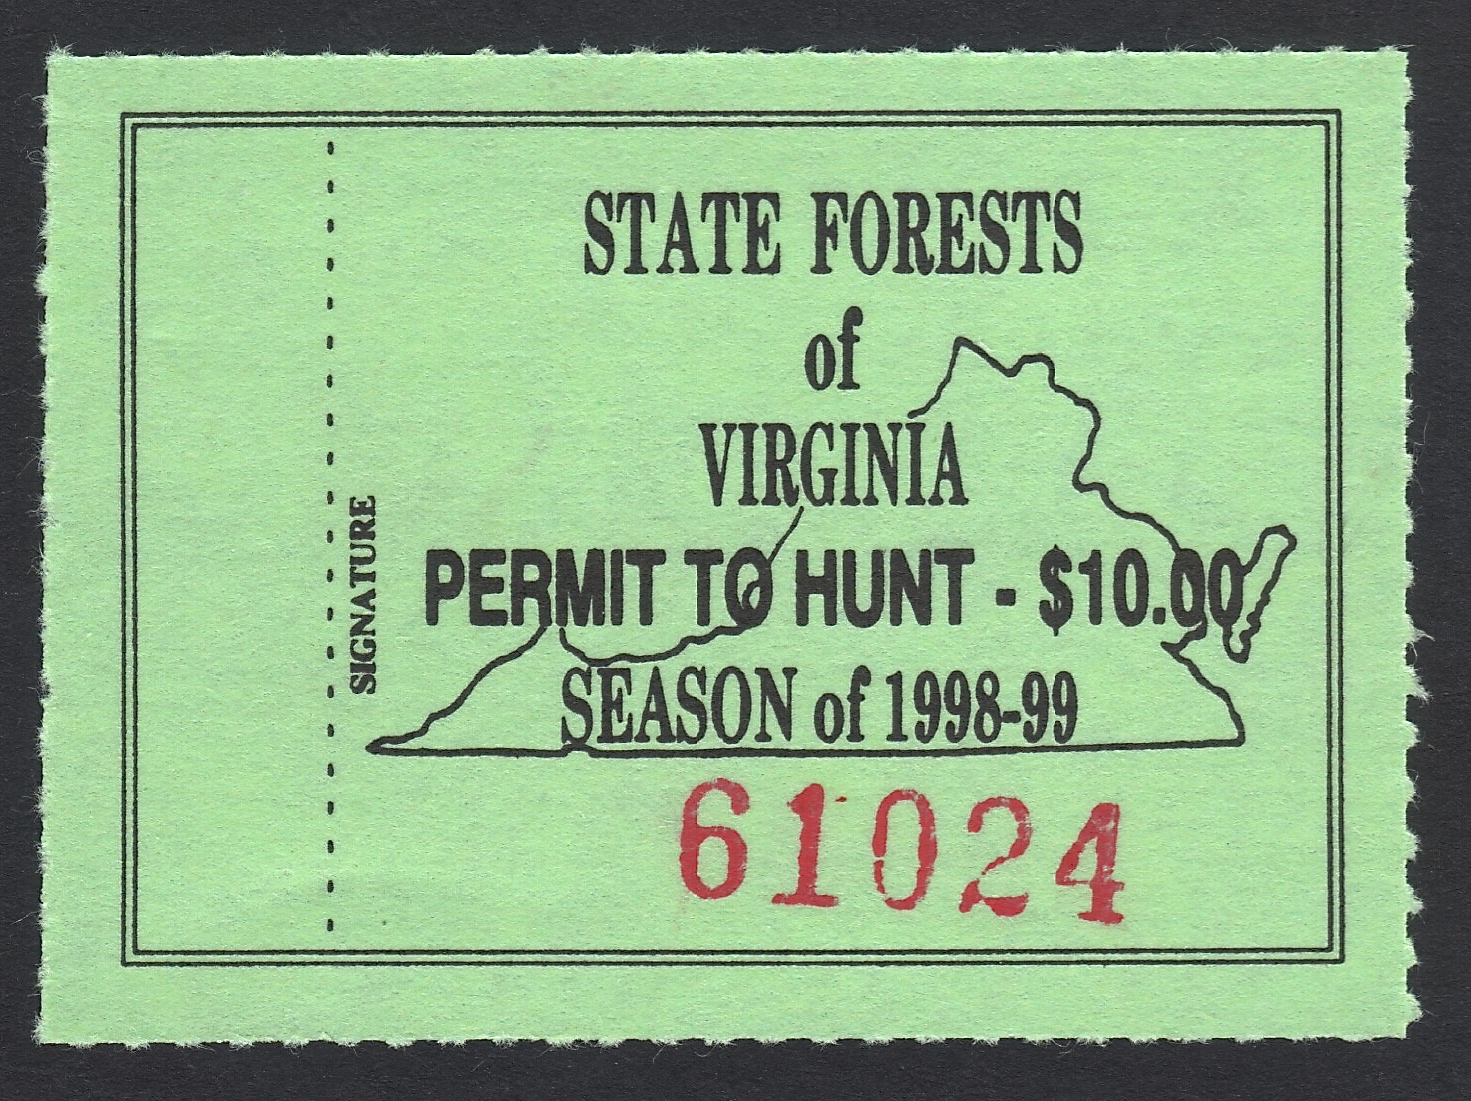 1998-99 Virginia State Forest